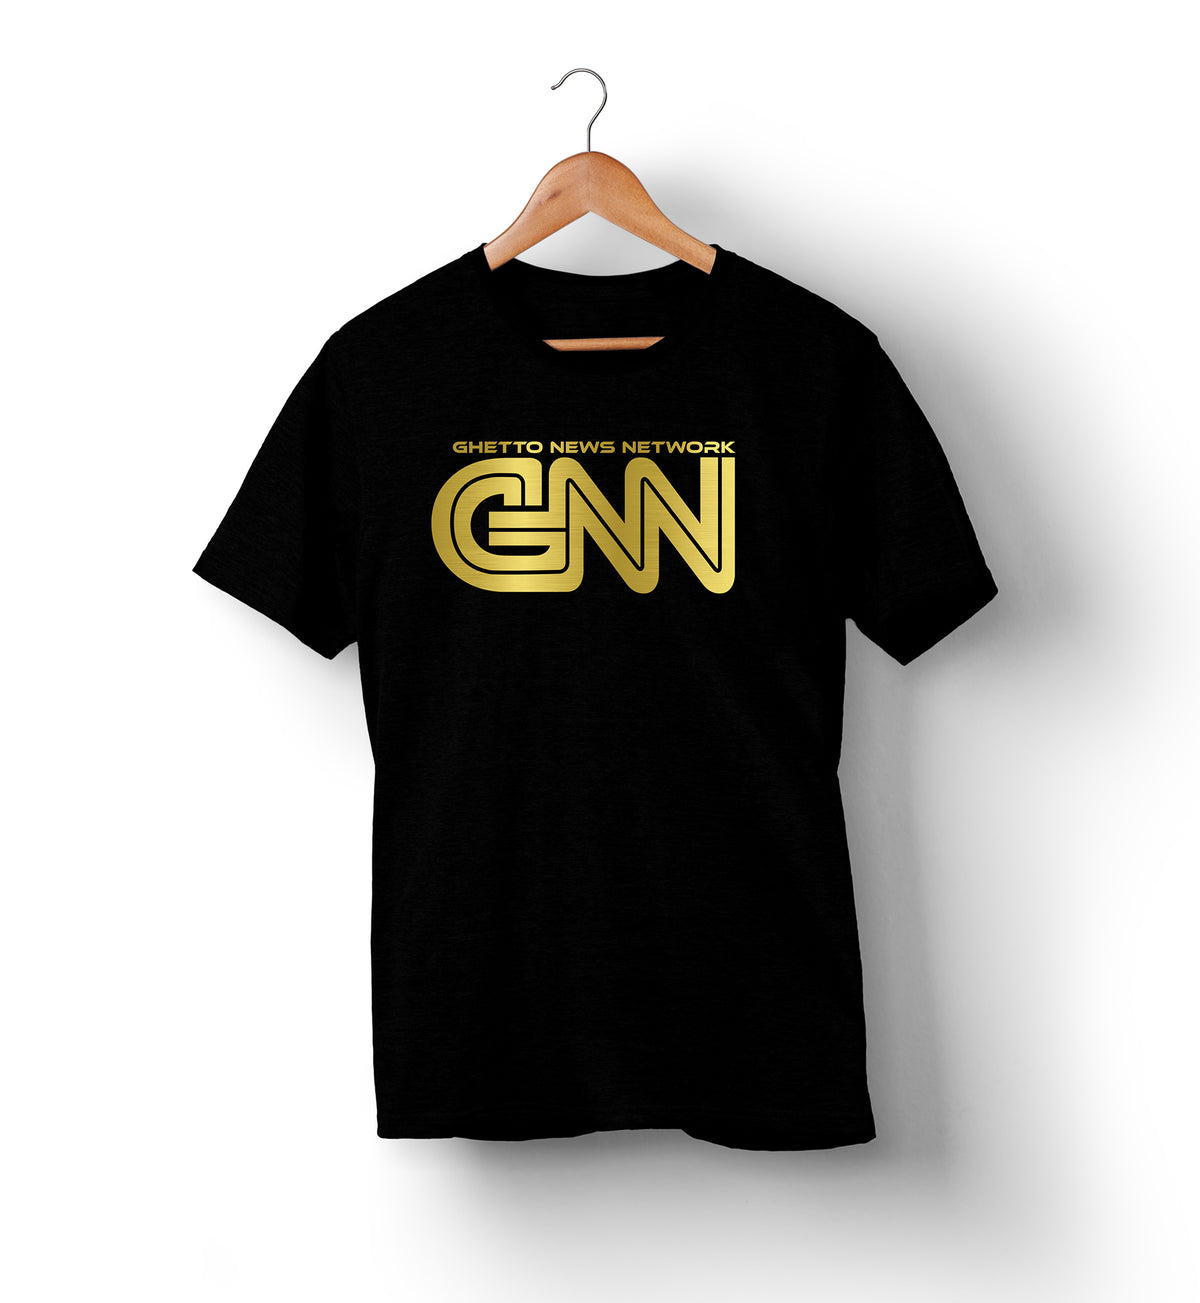 Shop and Buy Ghetto News Network Shirts